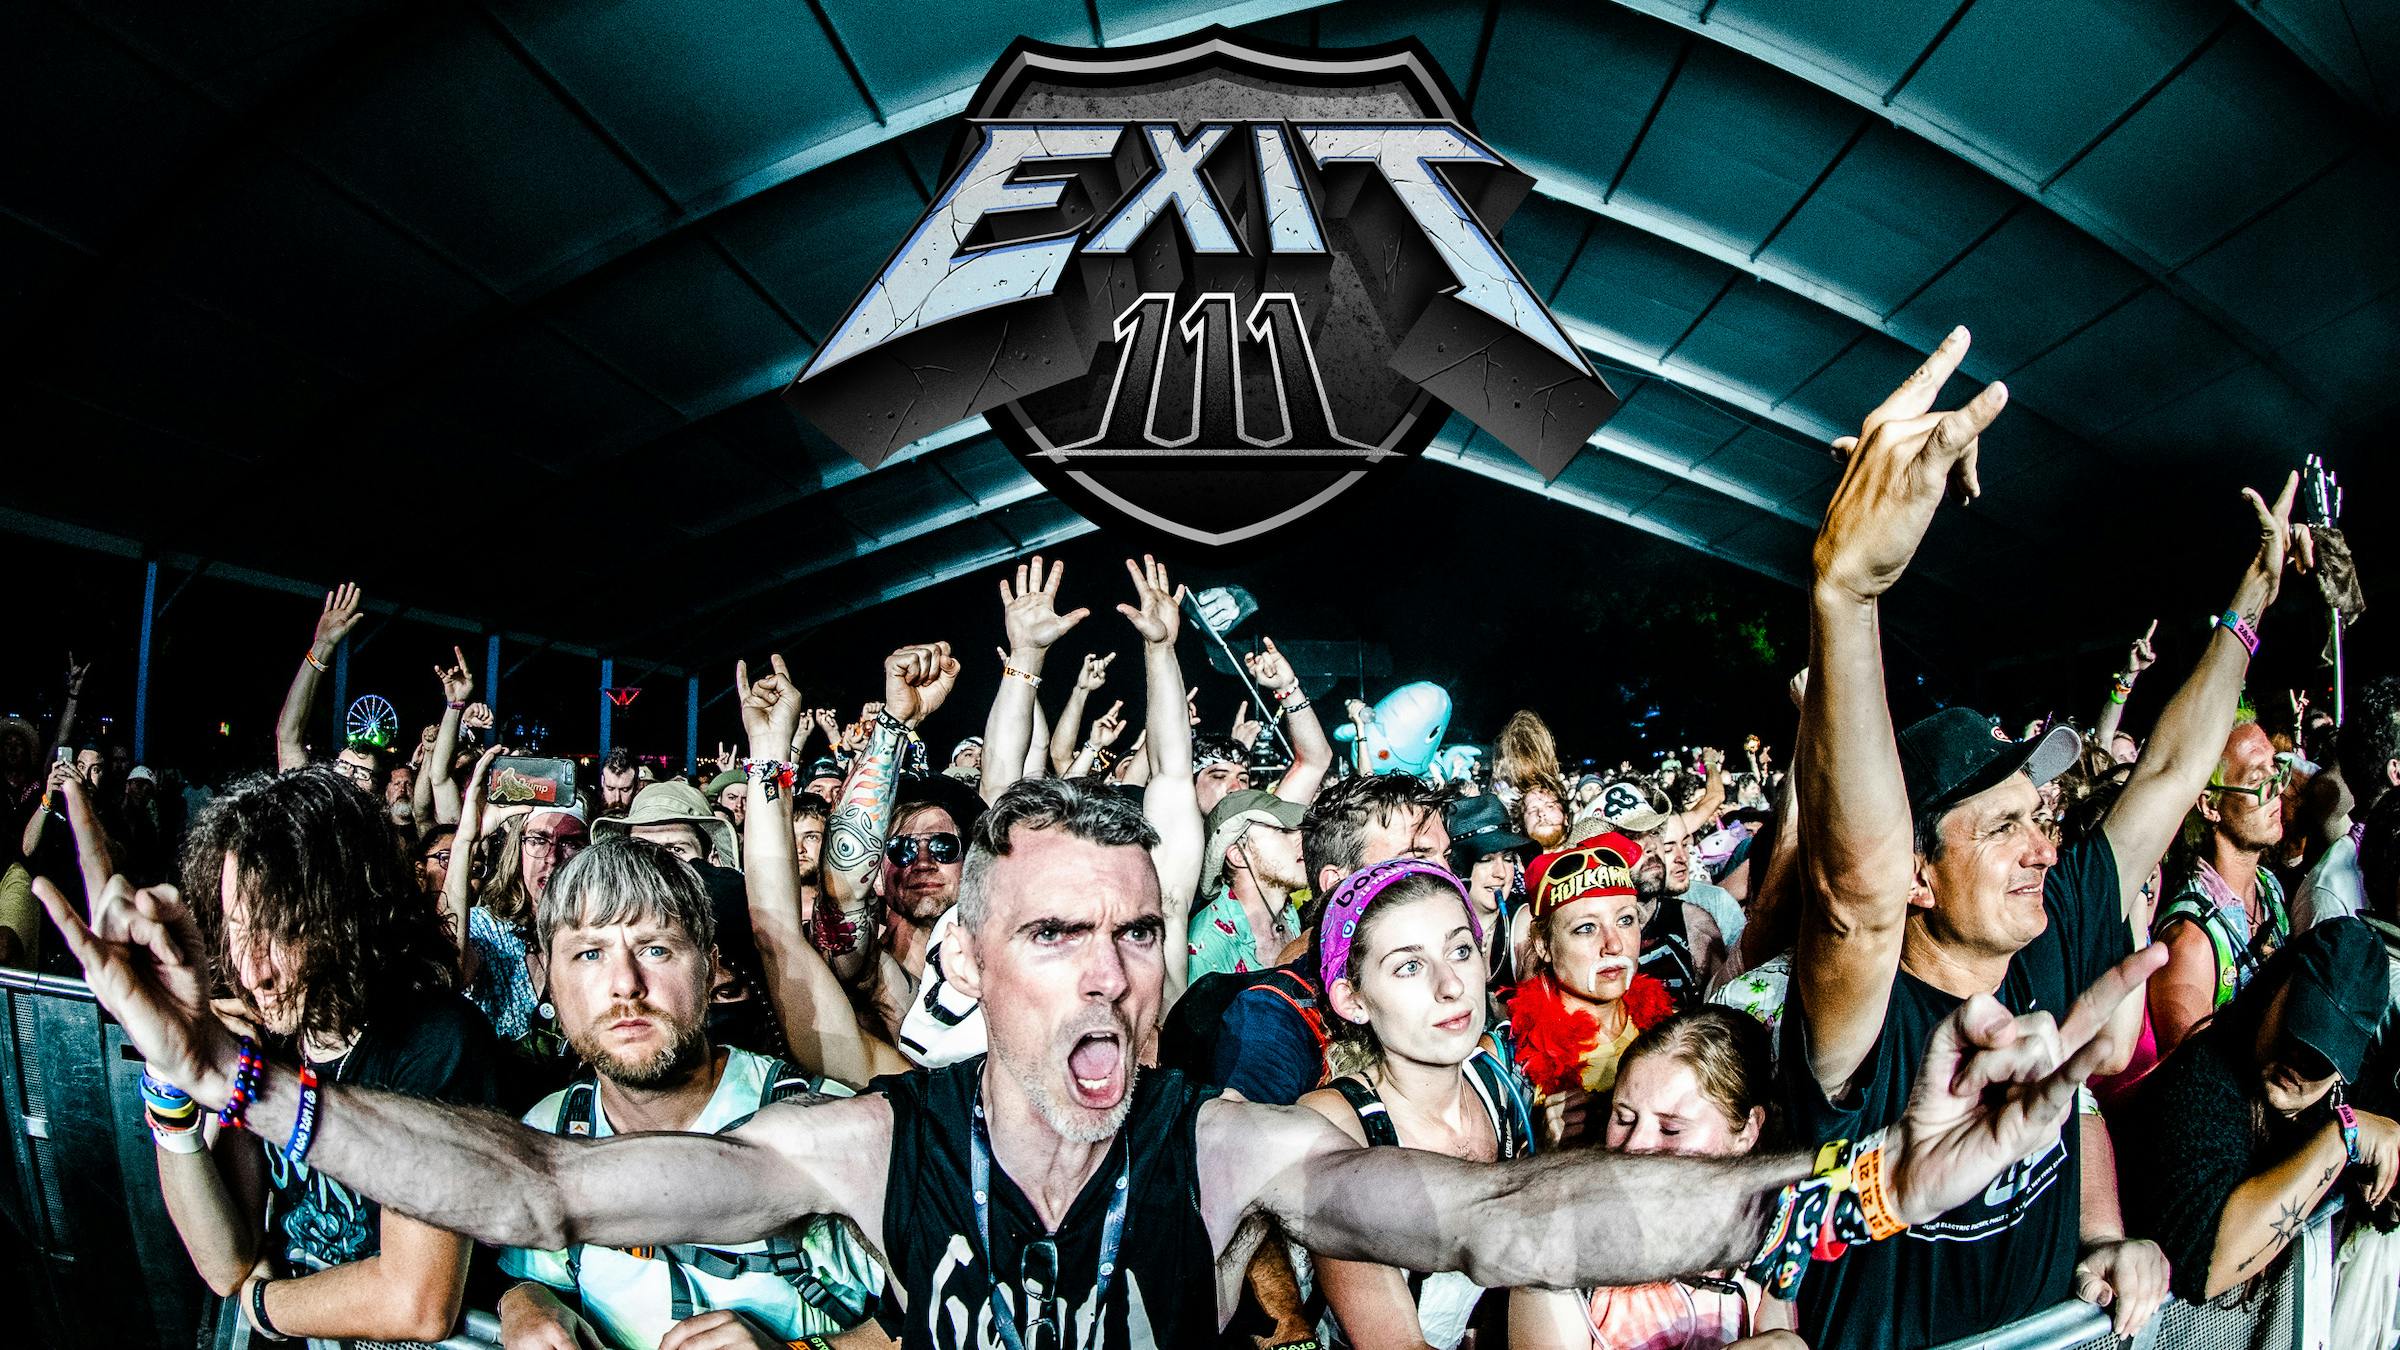 11 Things We’re Excited For At Exit 111 Fest